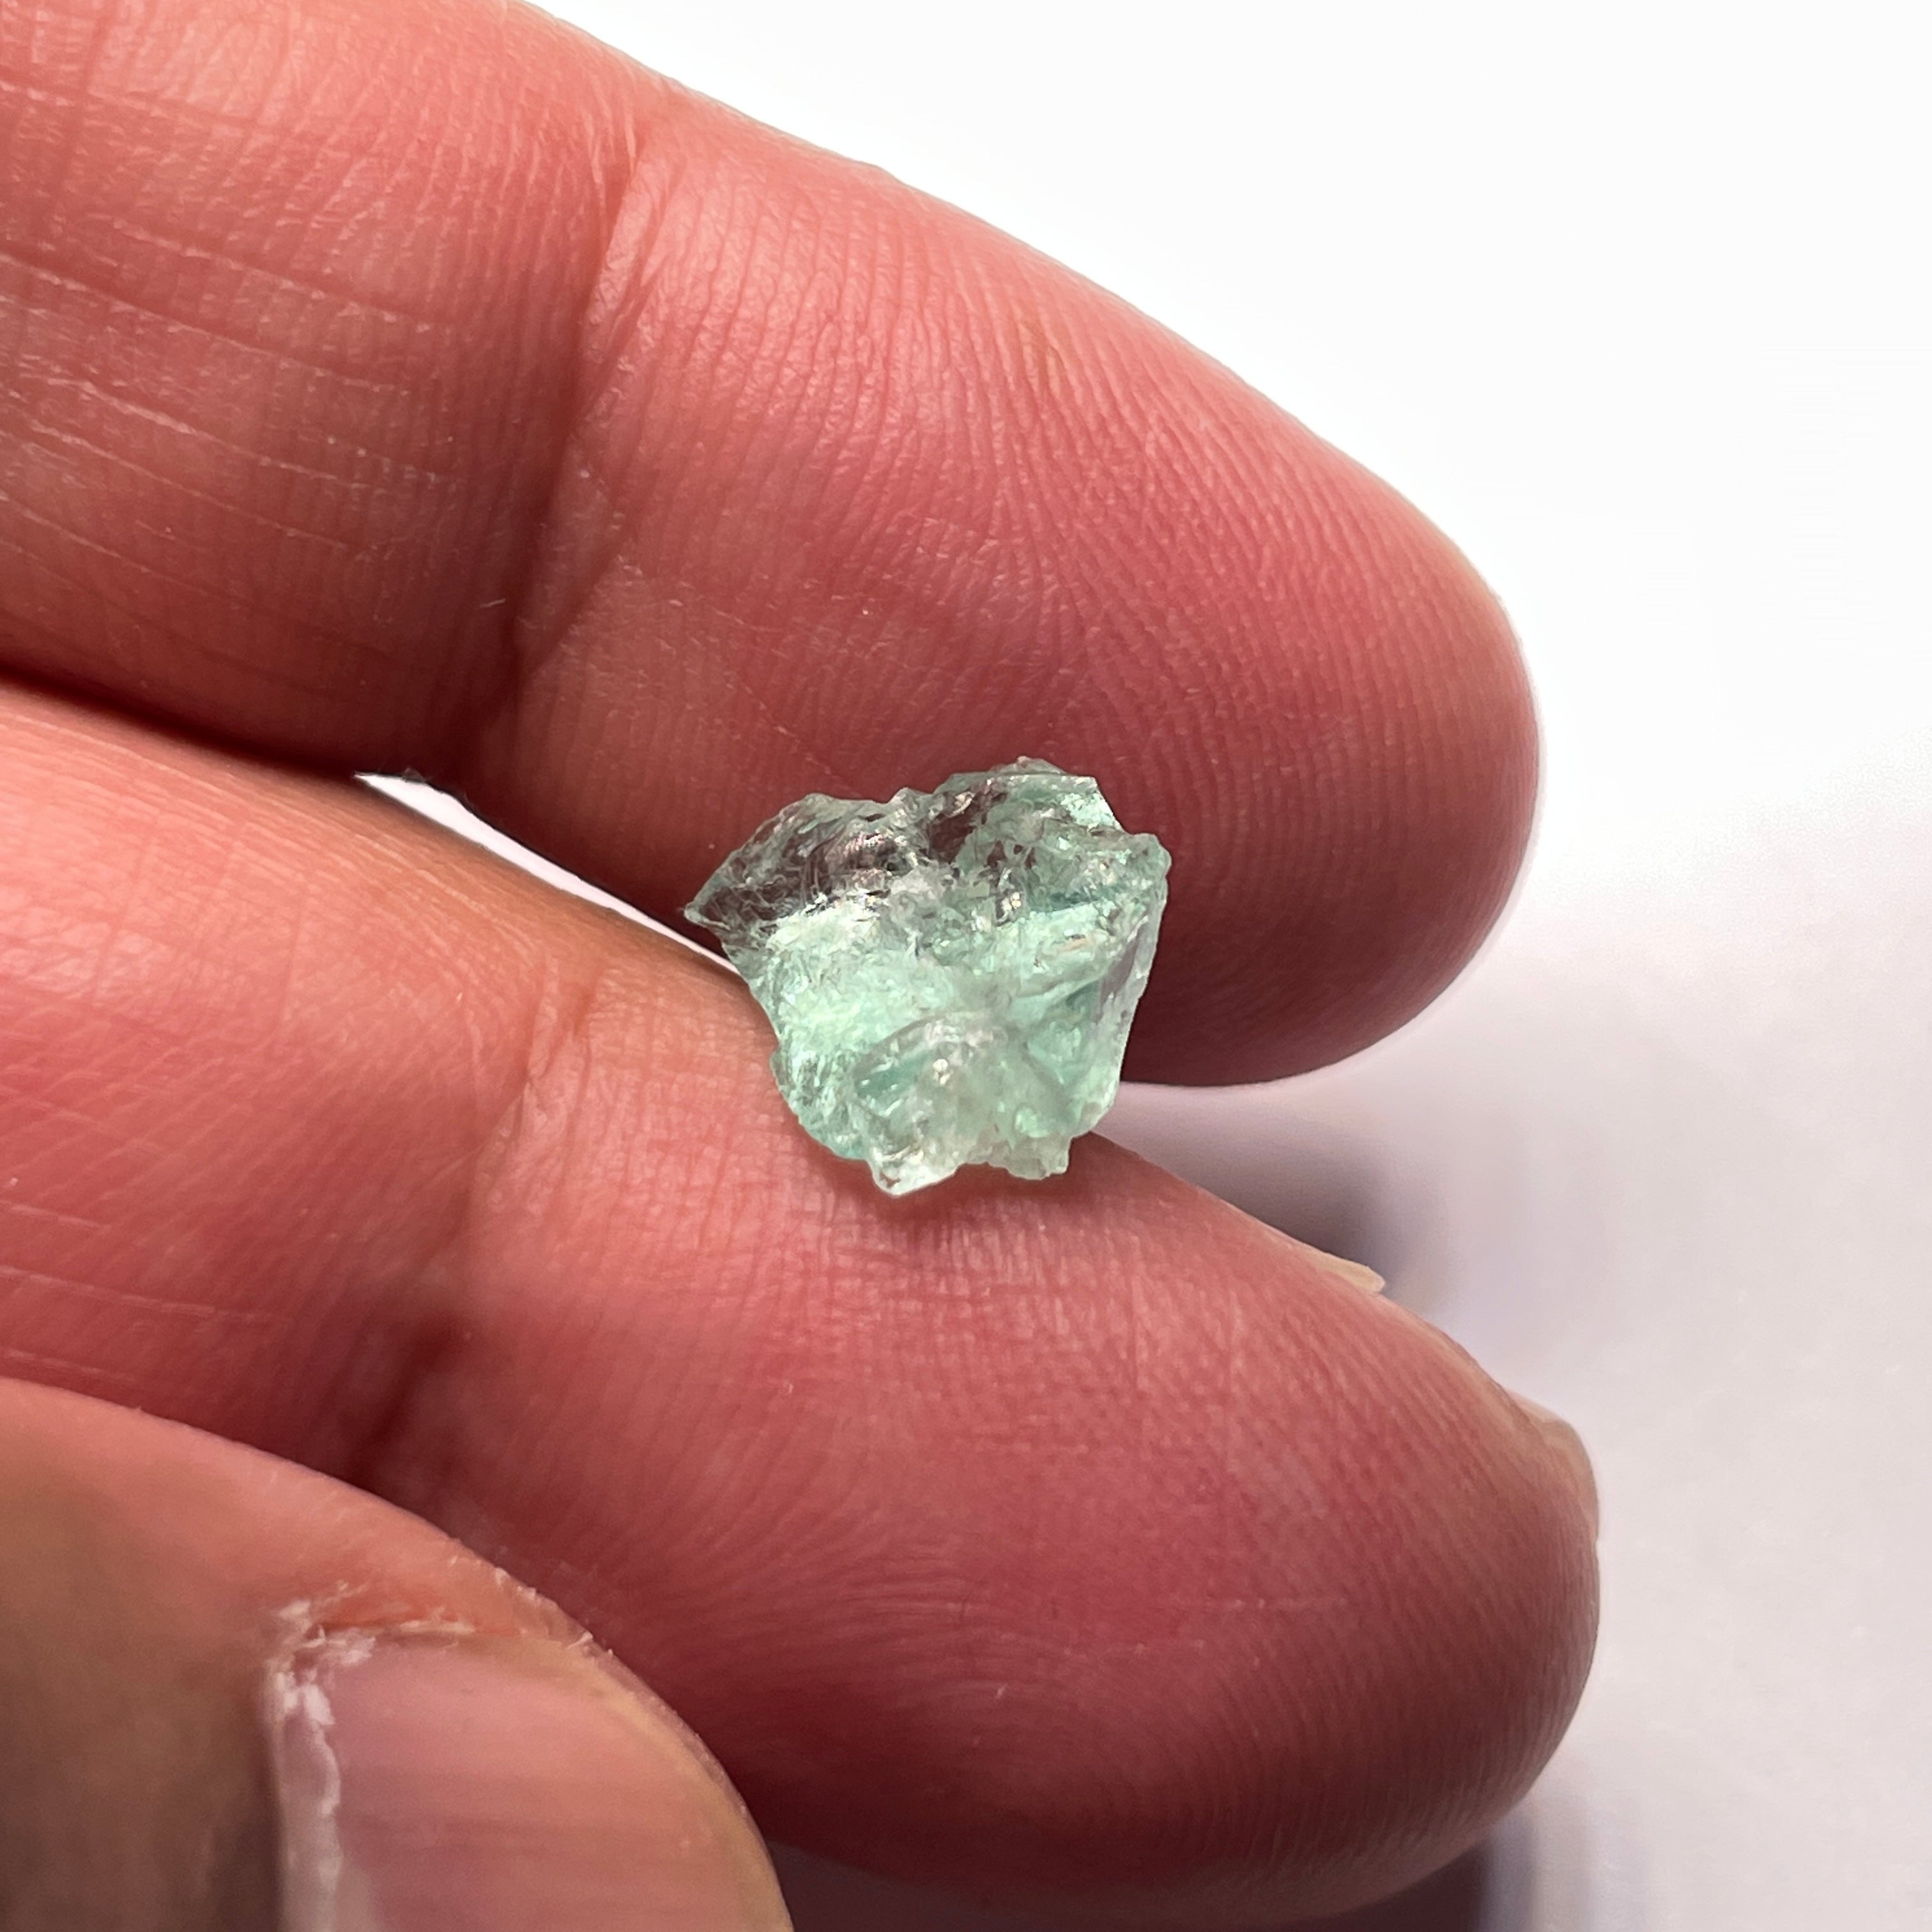 2.48Ct Emerald Tanzania Untreated Unheated No Oil Slight Inclusions Facet Or Cab With Set In